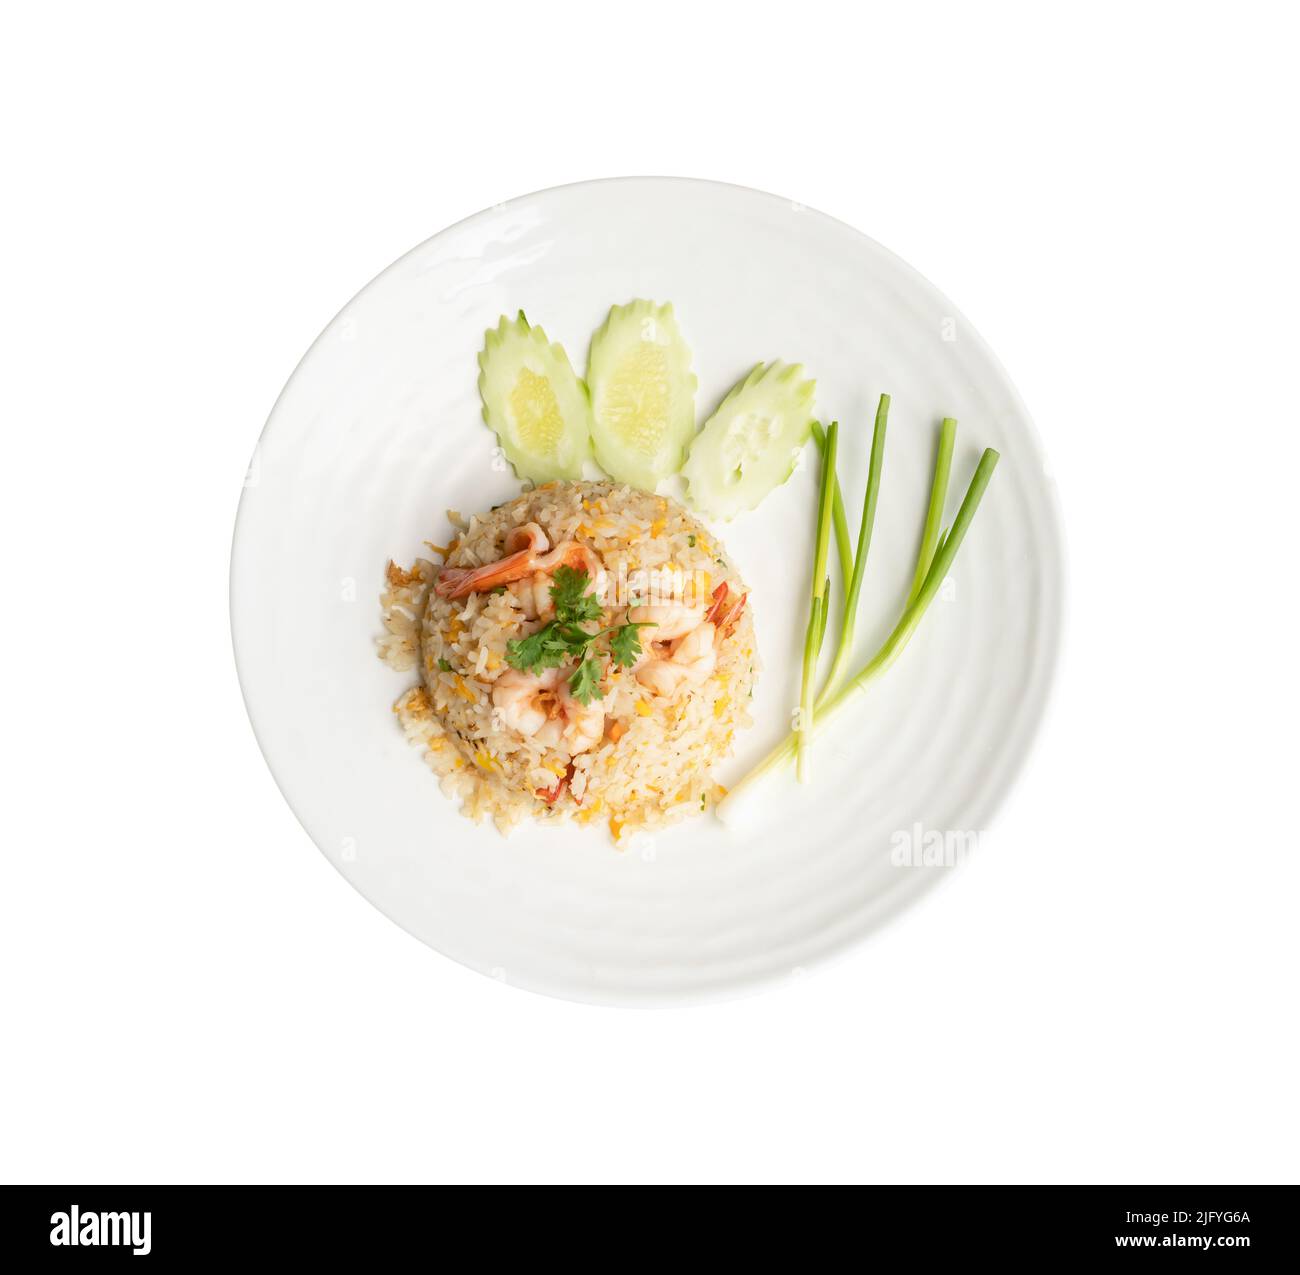 Top view. Fried rice with shrimp in round white dish isolated on white background. Thai Food concept Stock Photo